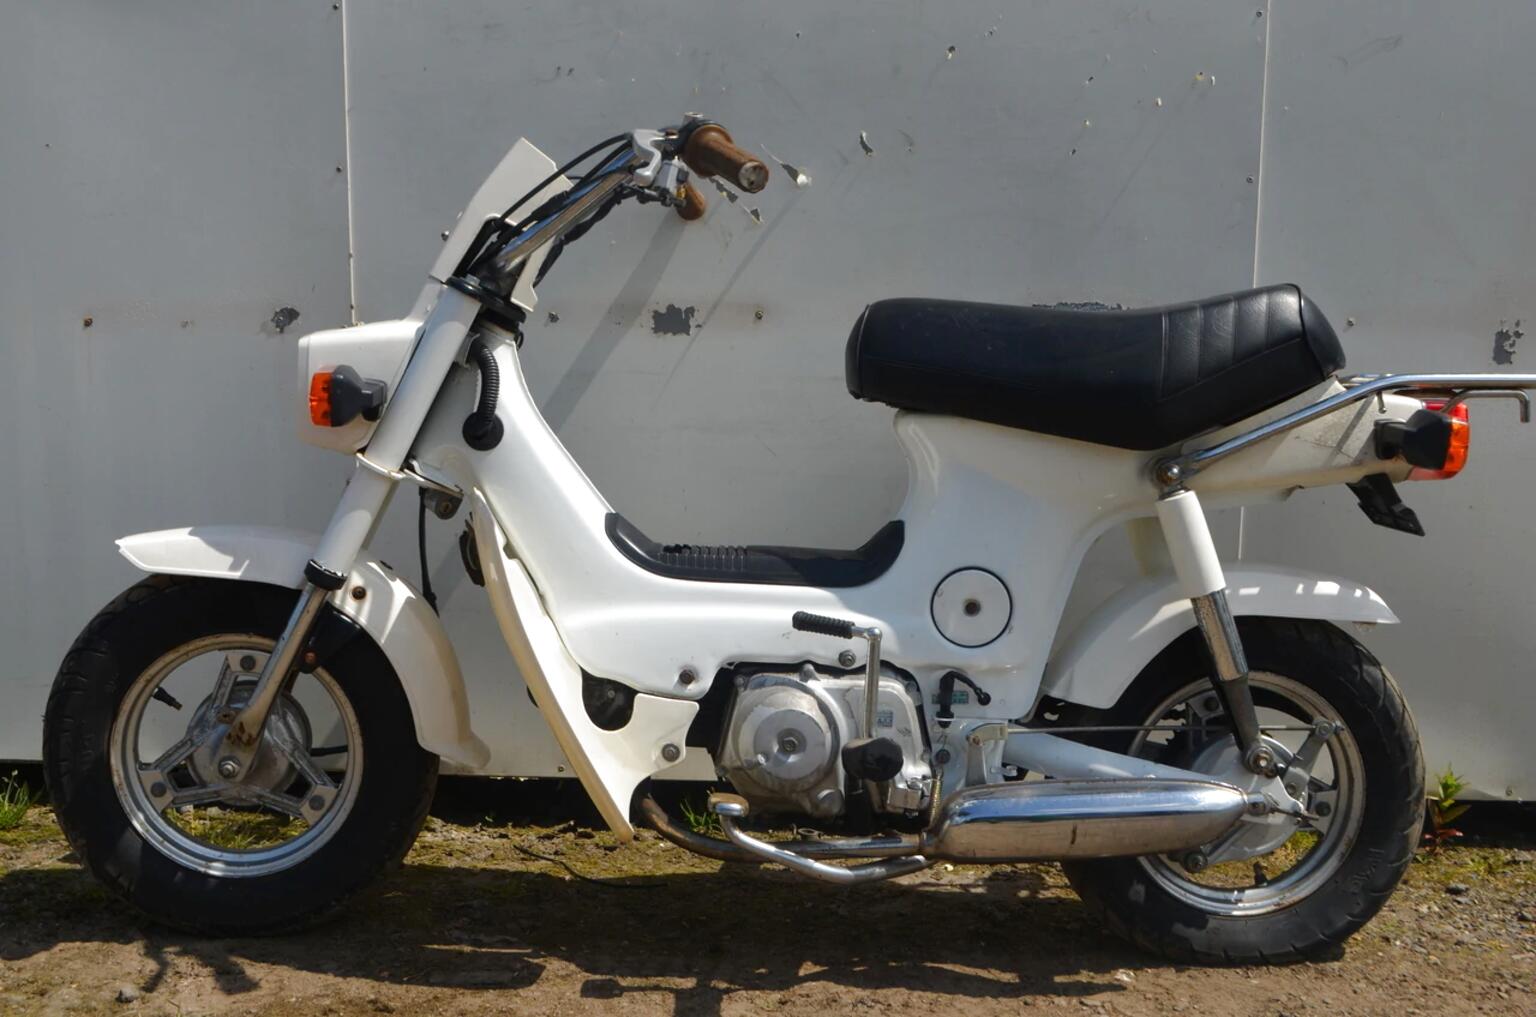 Honda Chaly for sale in UK | 39 used Honda Chalys